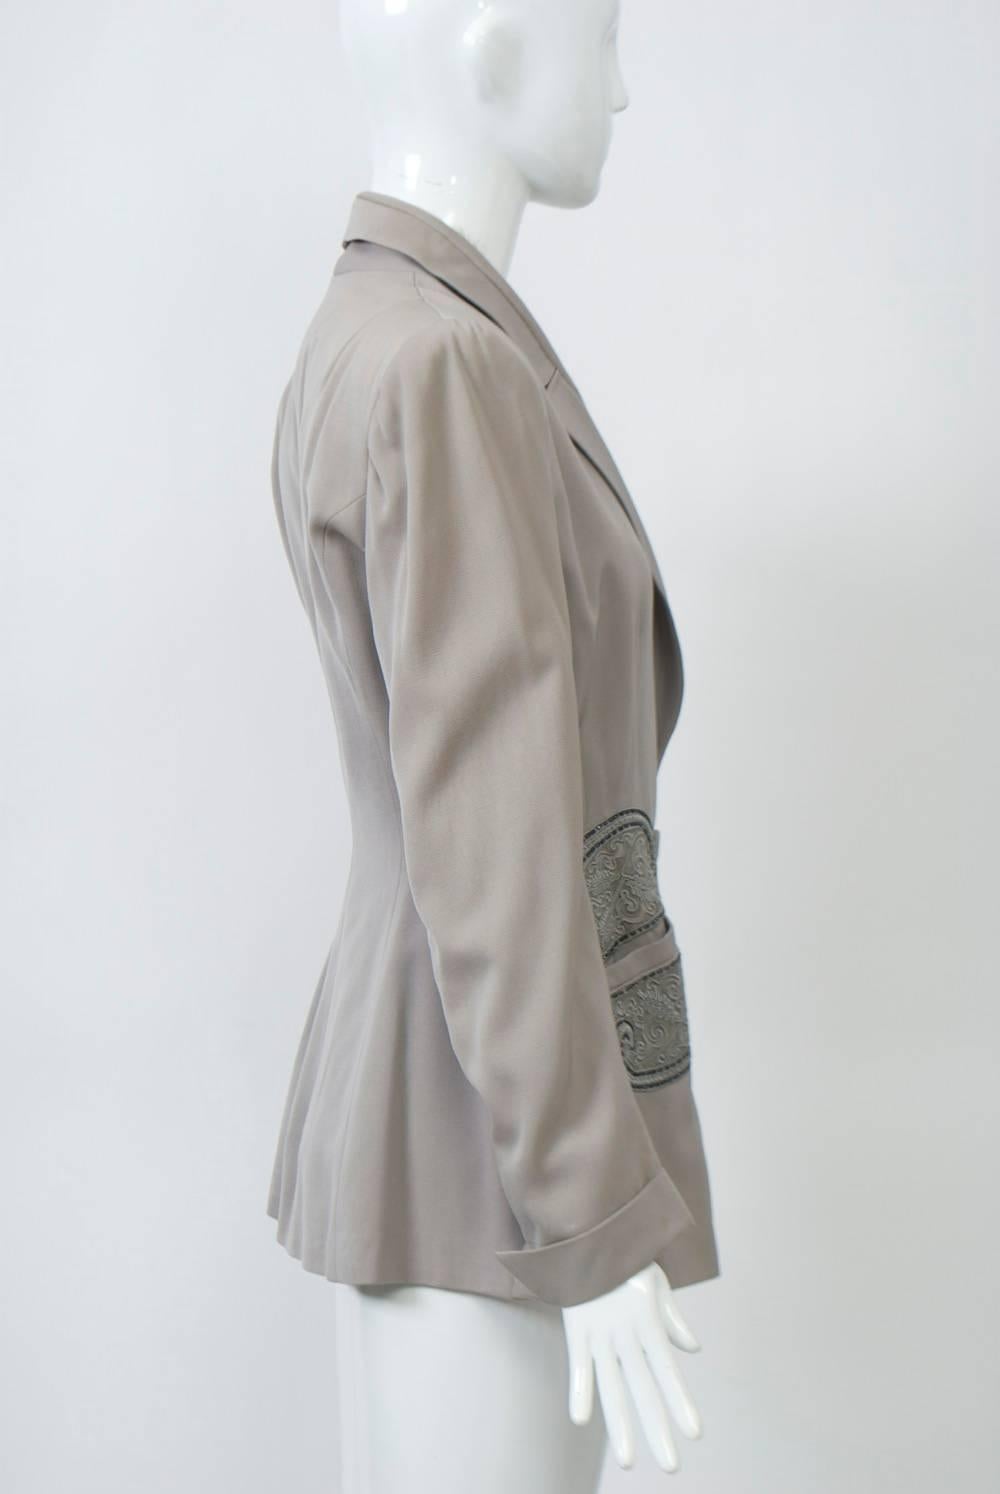 1940s pale taupe gabardine jacket accented with gray beading above and below pockets. Long, fitted body, nipped at waist, with nice detailing, including notched shawl collar, turned-back wrists and single-button closure. Square shoulders with pads.